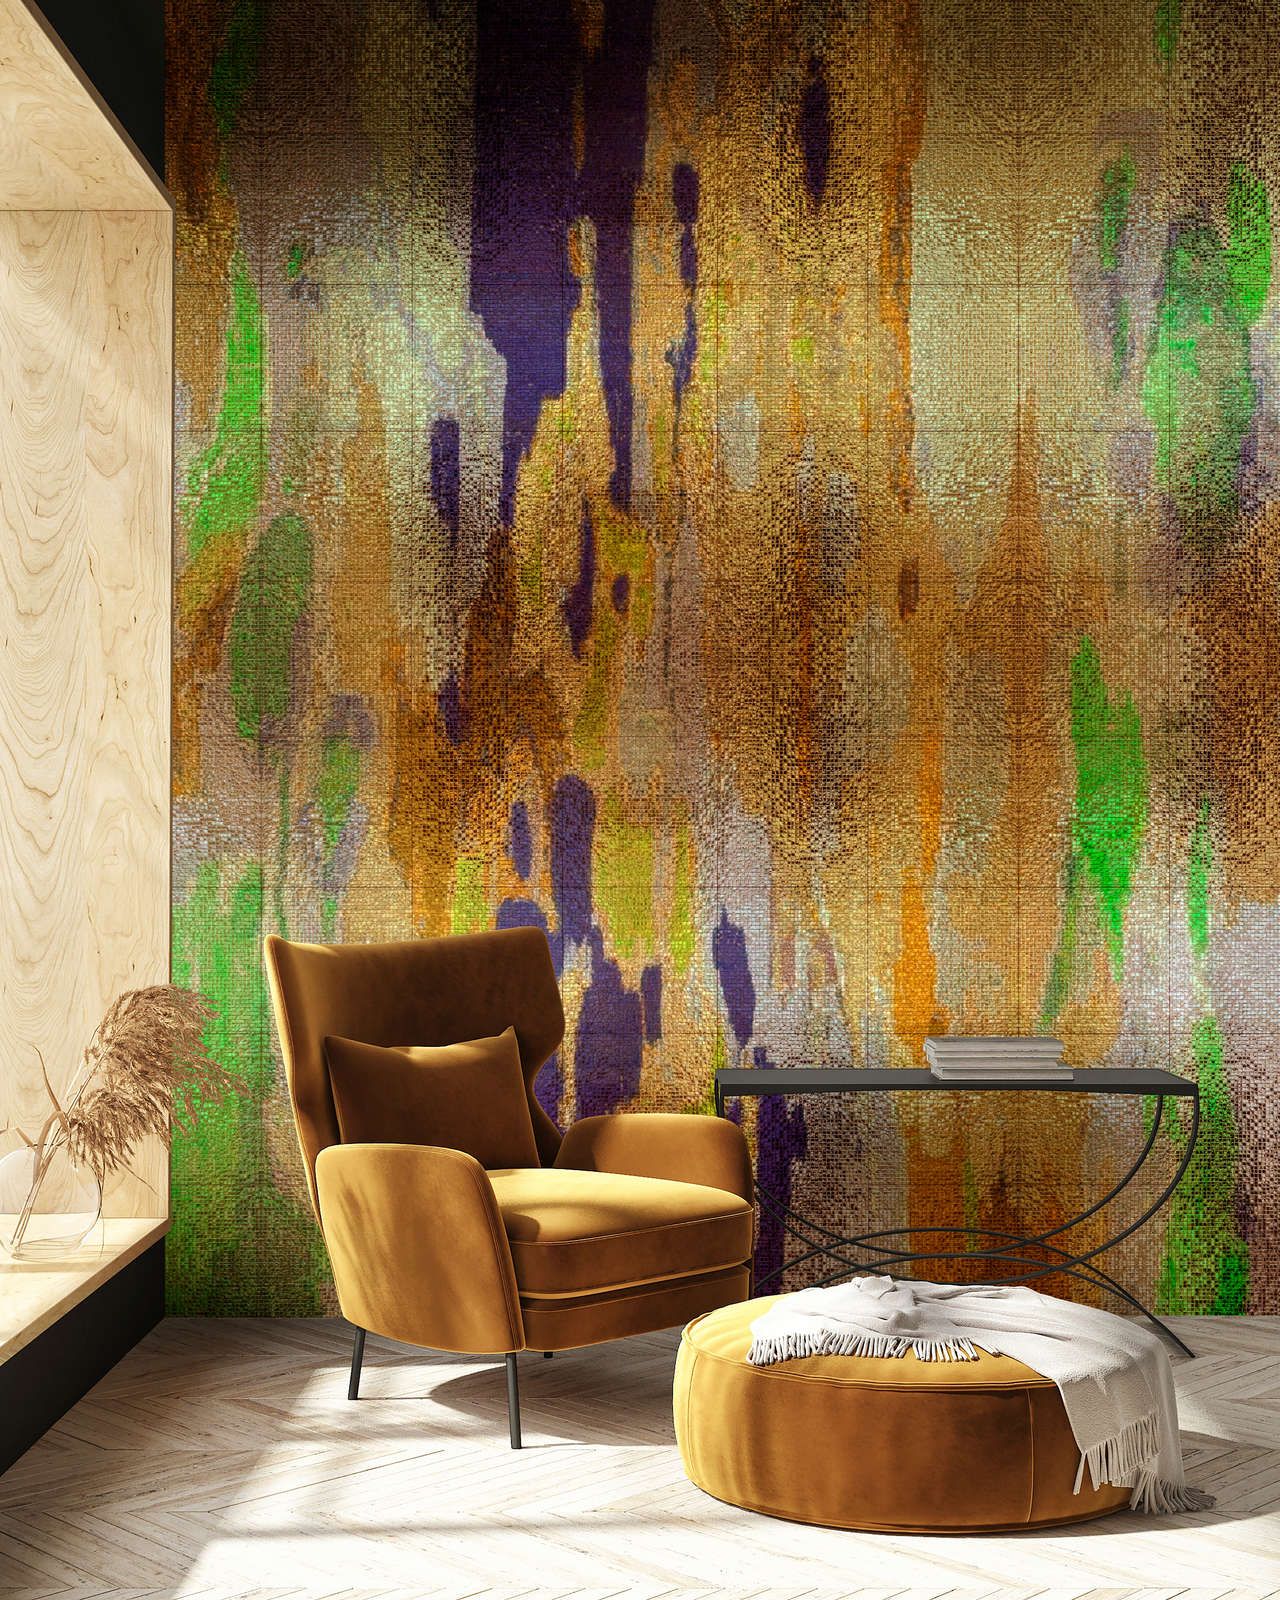             Photo wallpaper »marielle 1« - Colour gradients purple, gold, green with mosaic structure - Smooth, slightly shiny premium non-woven fabric
        